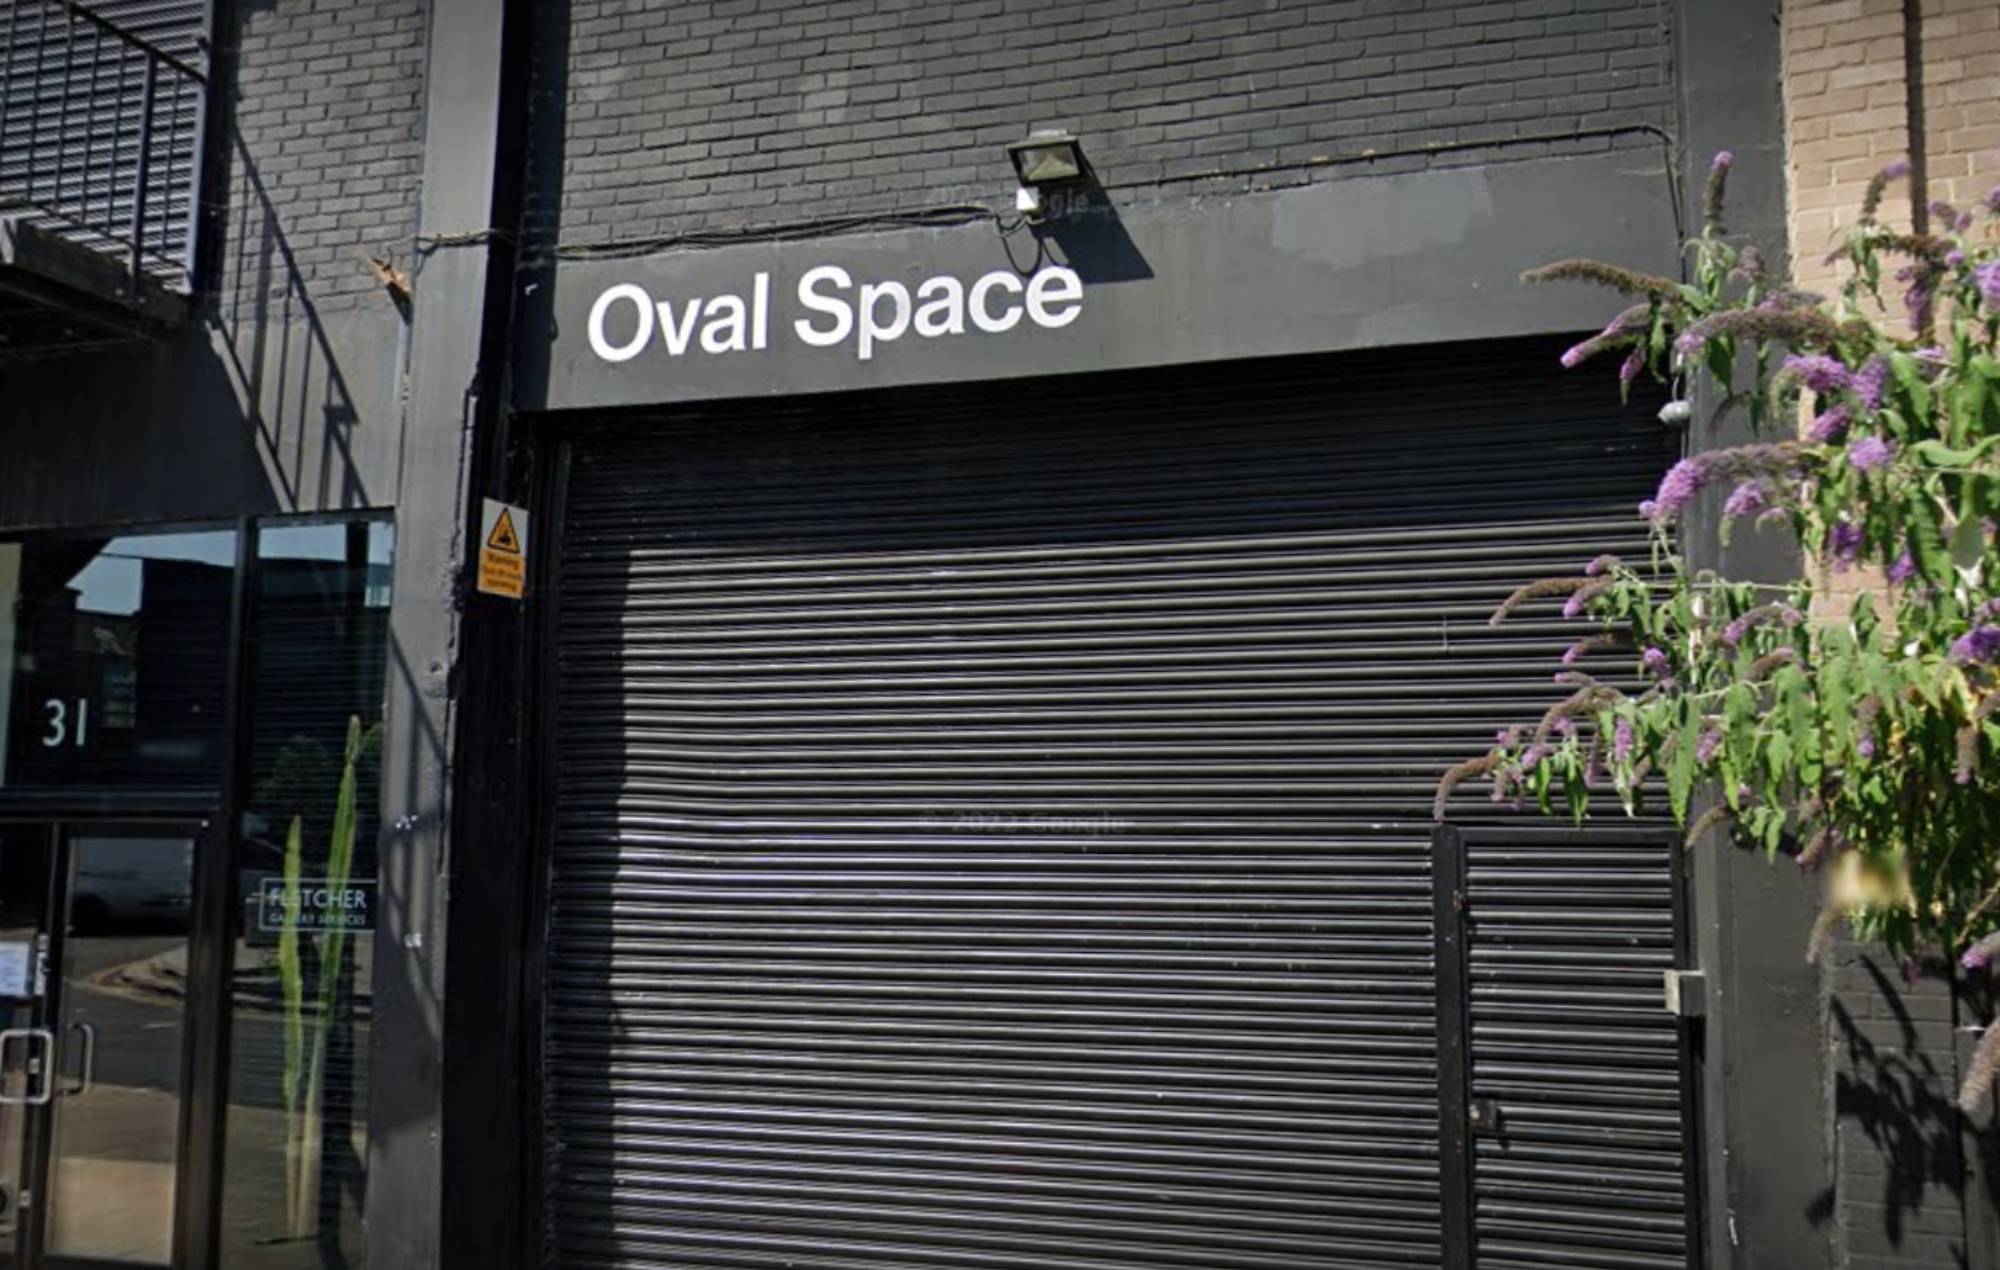 East London club Oval Space loses license after alleged shooting